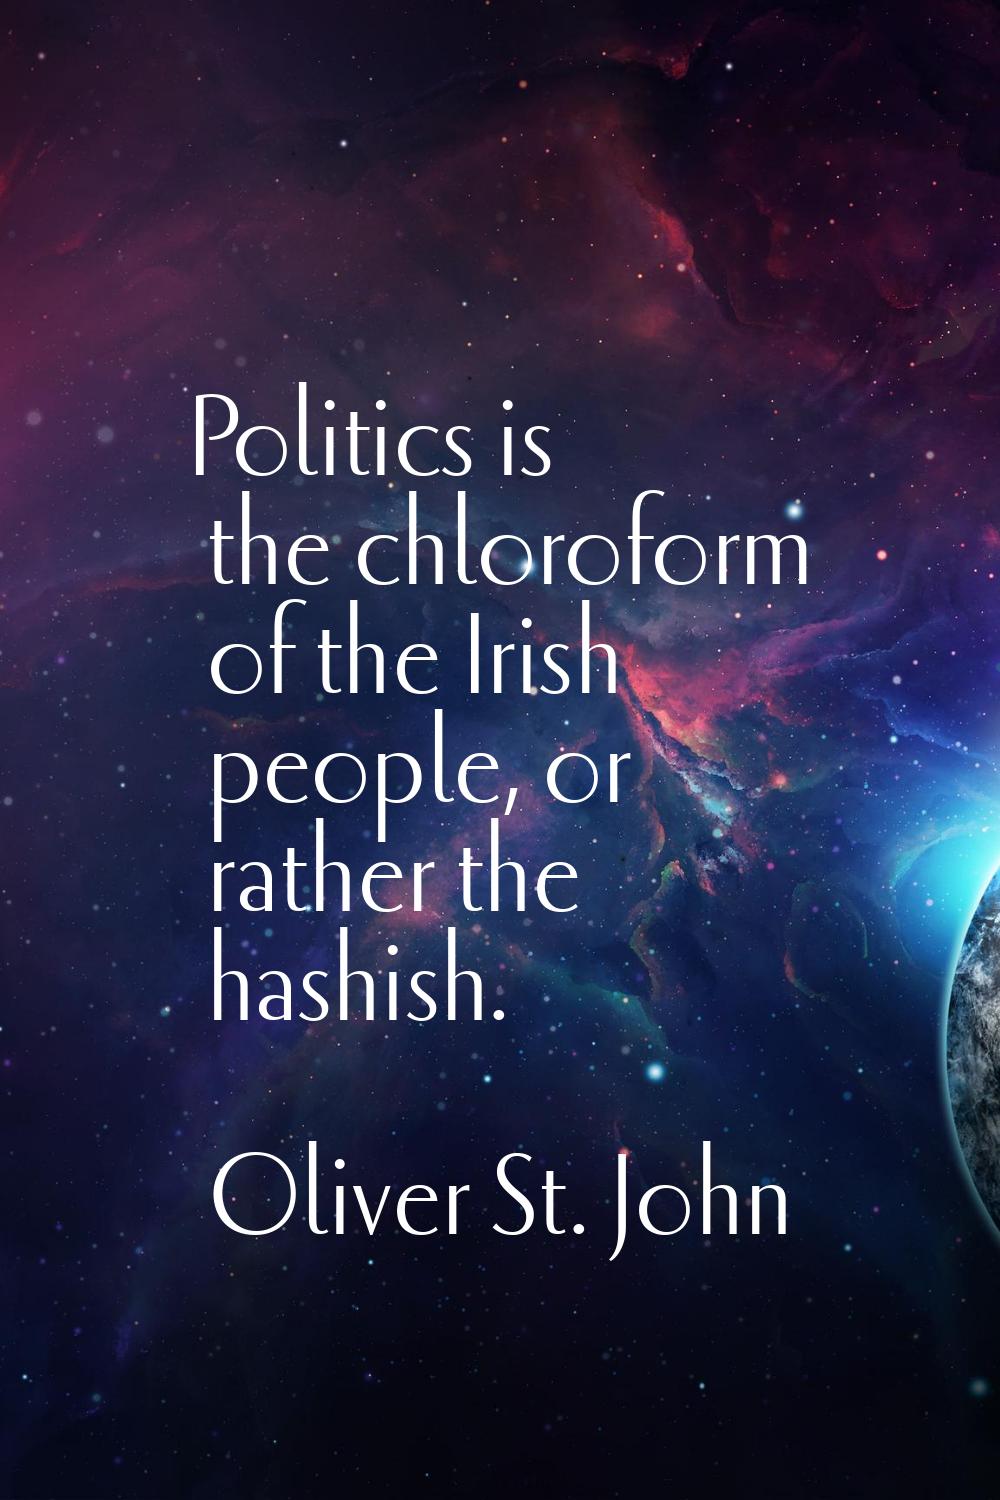 Politics is the chloroform of the Irish people, or rather the hashish.